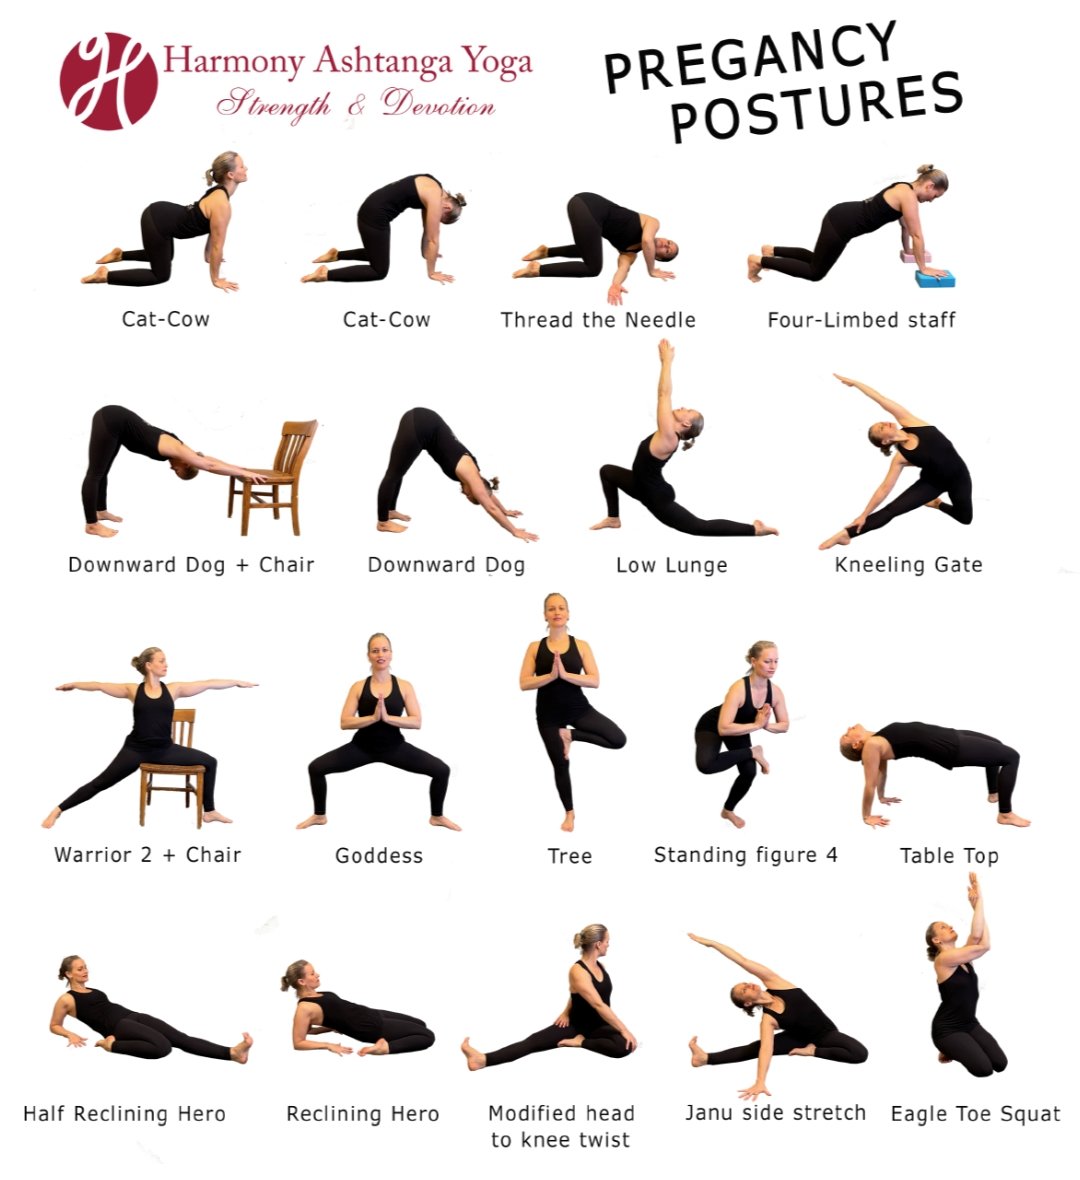 Yoga Poses to Avoid During Pregnancy with Modifications // Whitney E. RD